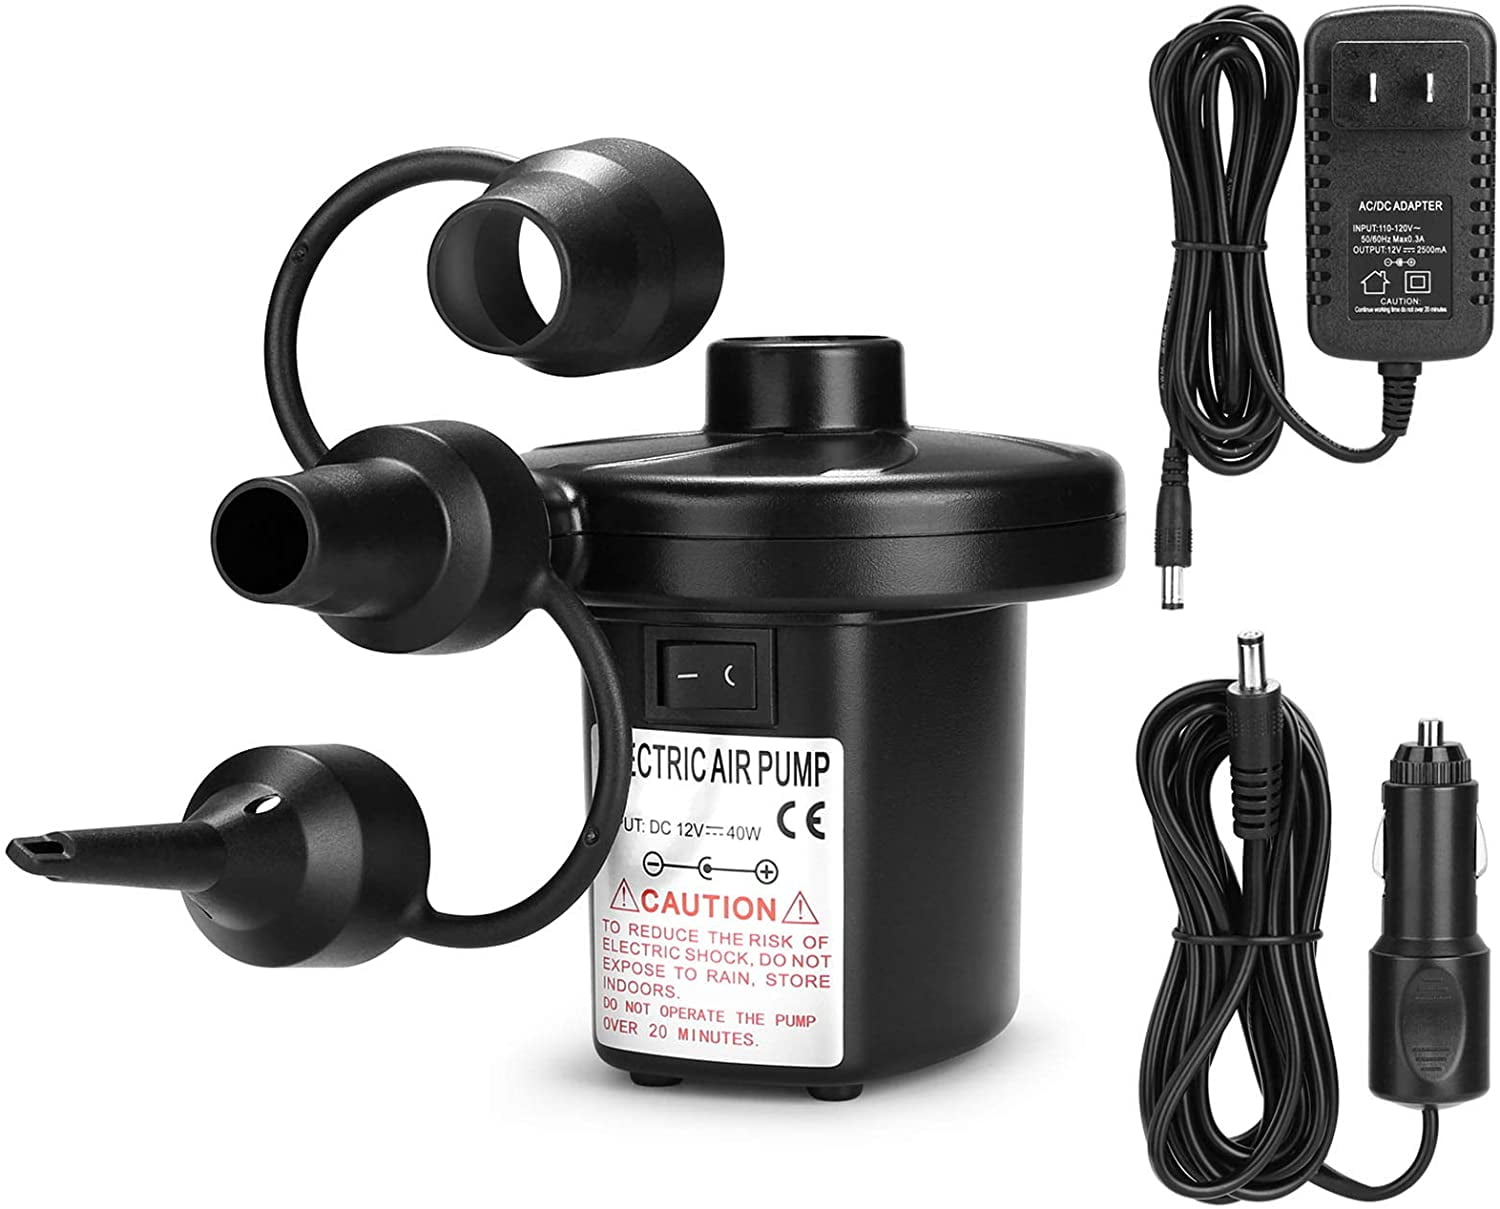 240V/12V Electric Air Pump Inflator/Deflator for Airbeds Paddling Pools & Toys 